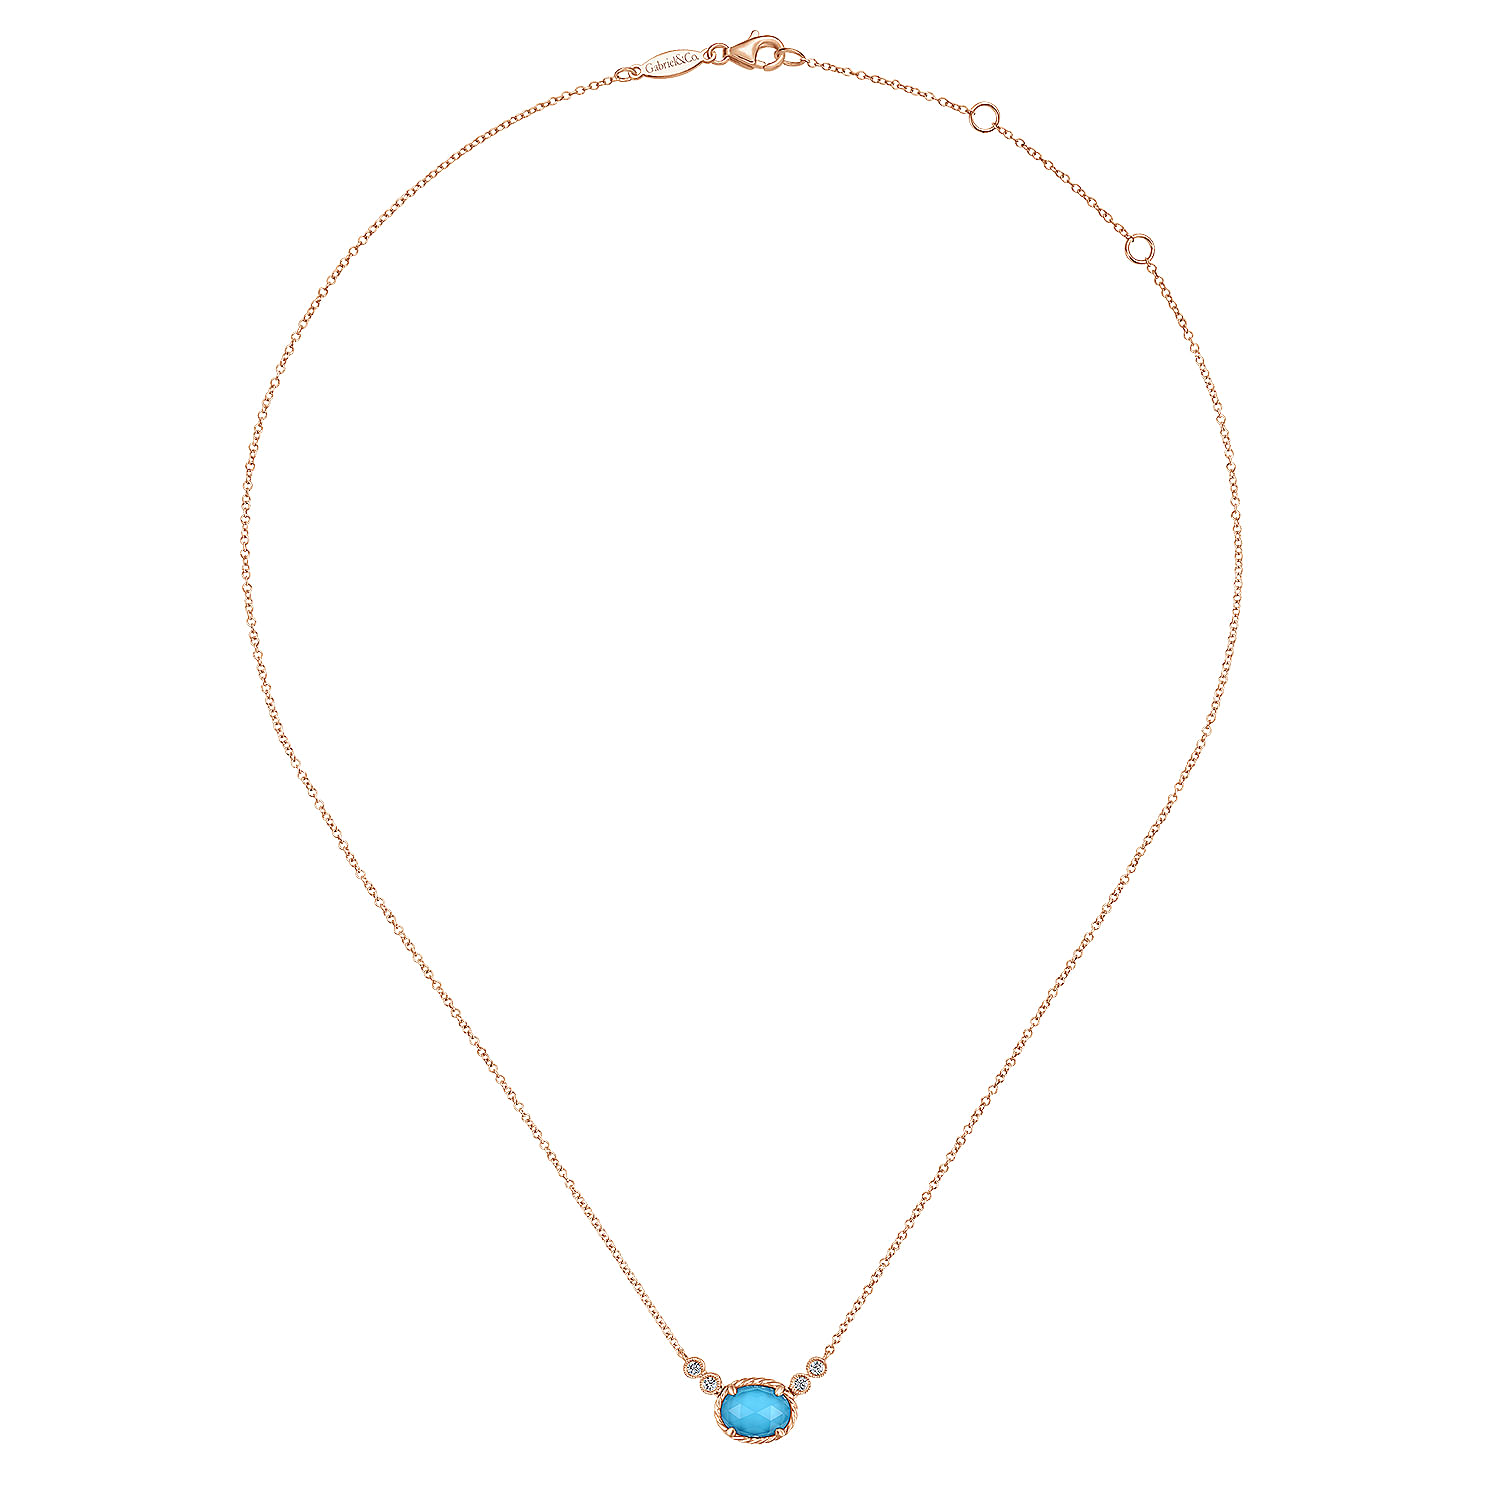 14K Rose Gold Oval Rock Crystal/Turquoise and Diamond Pendant Necklace